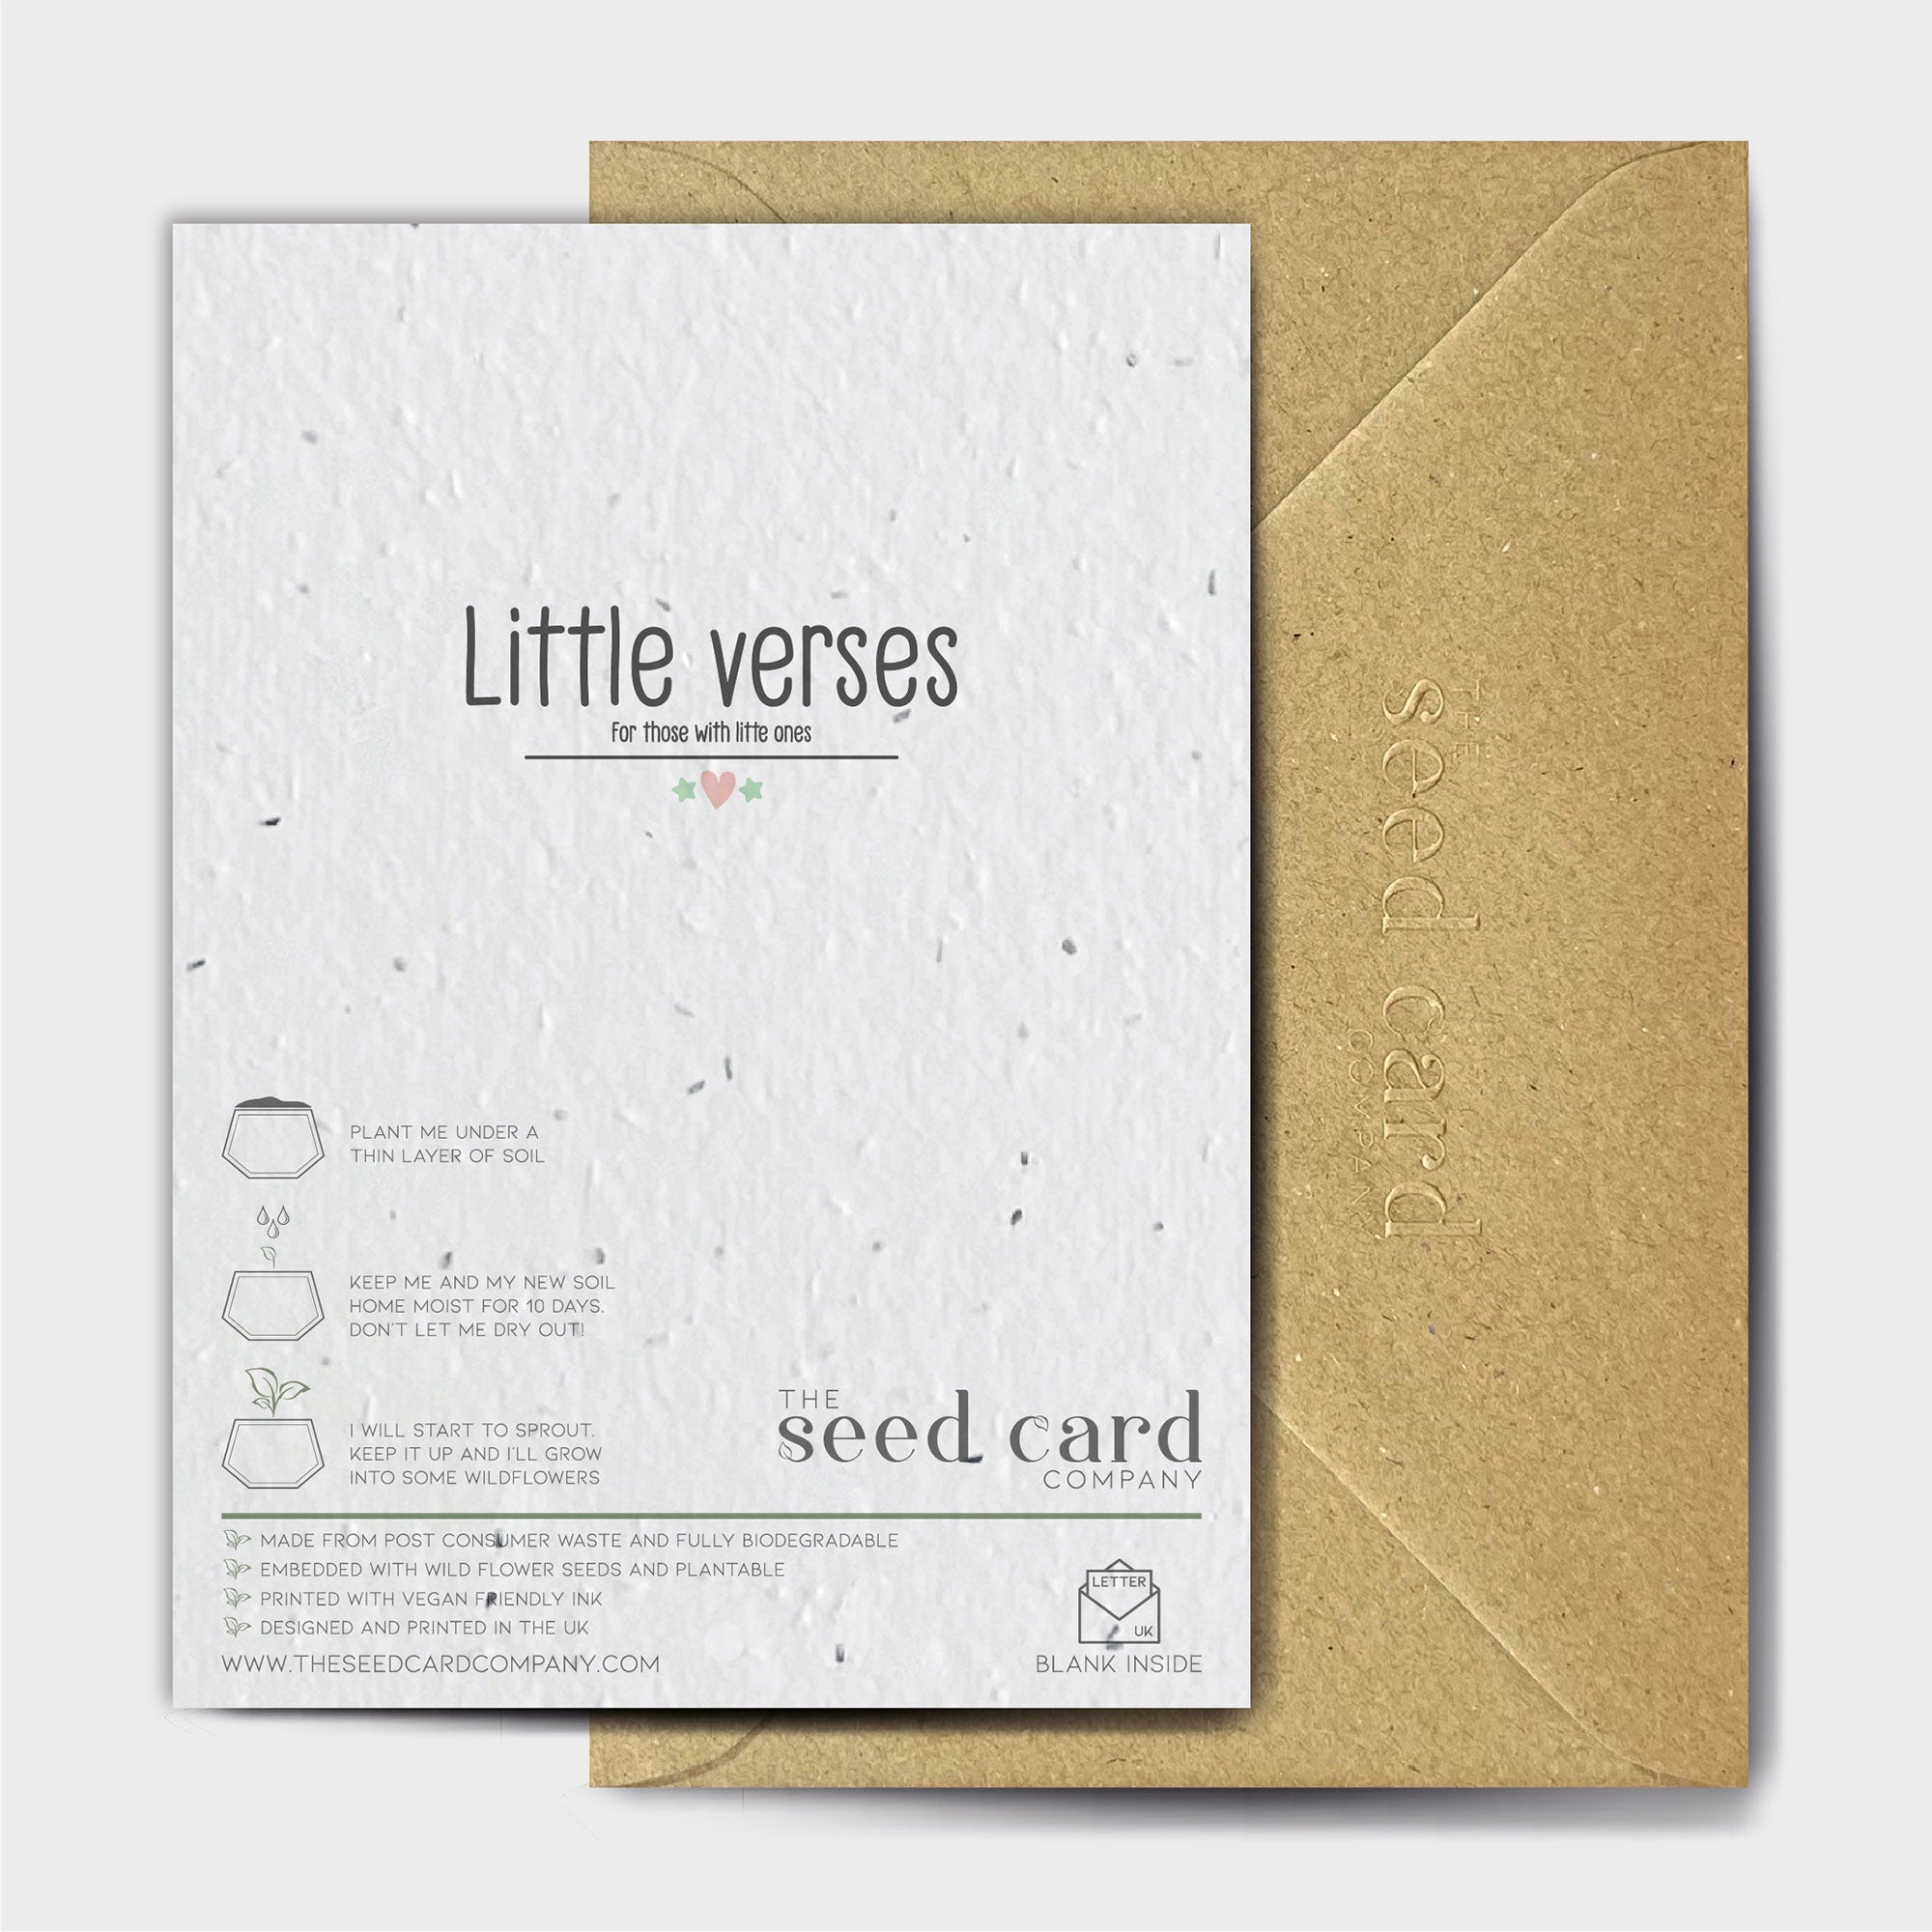 Shop online Apples and Pears - 100% biodegradable seed-embedded cards Shop -The Seed Card Company